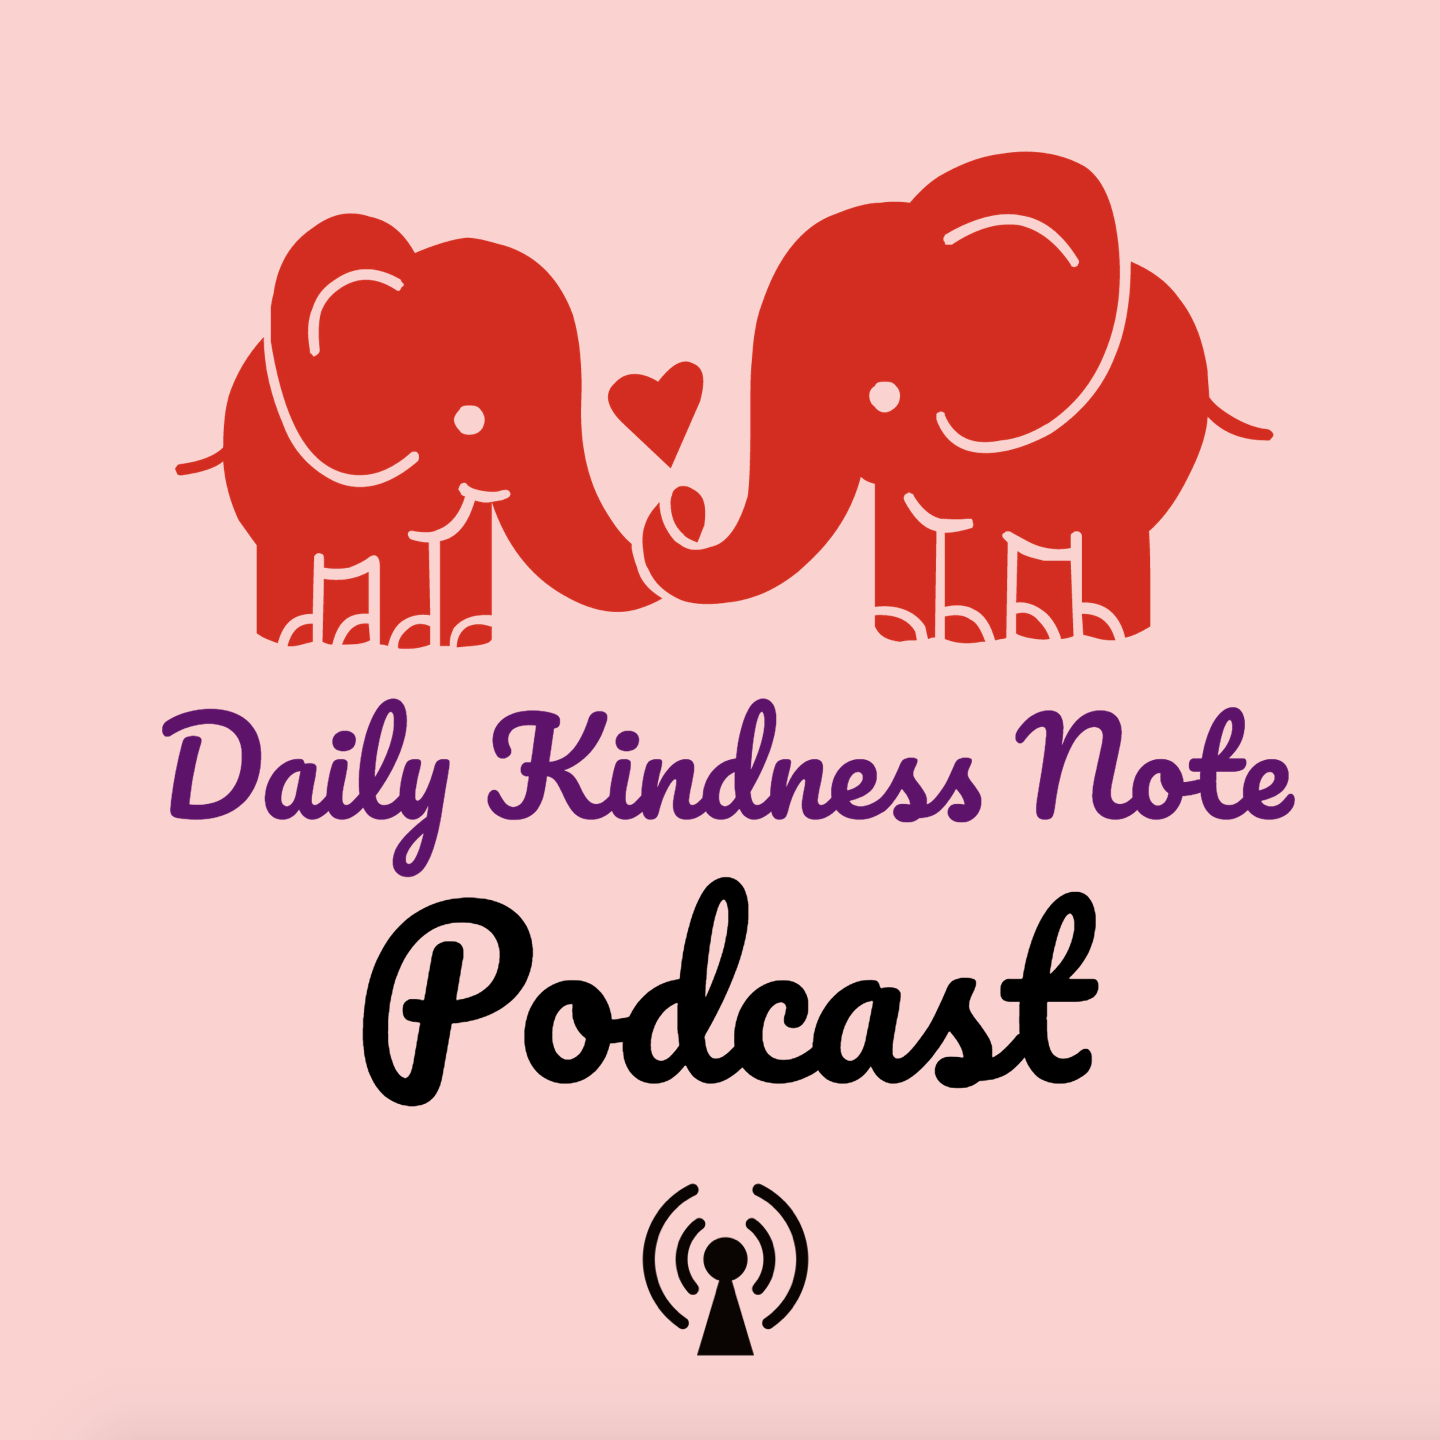 Daily Kindness Note Podcast - Ep. 13: Bask in Simple Pleasures